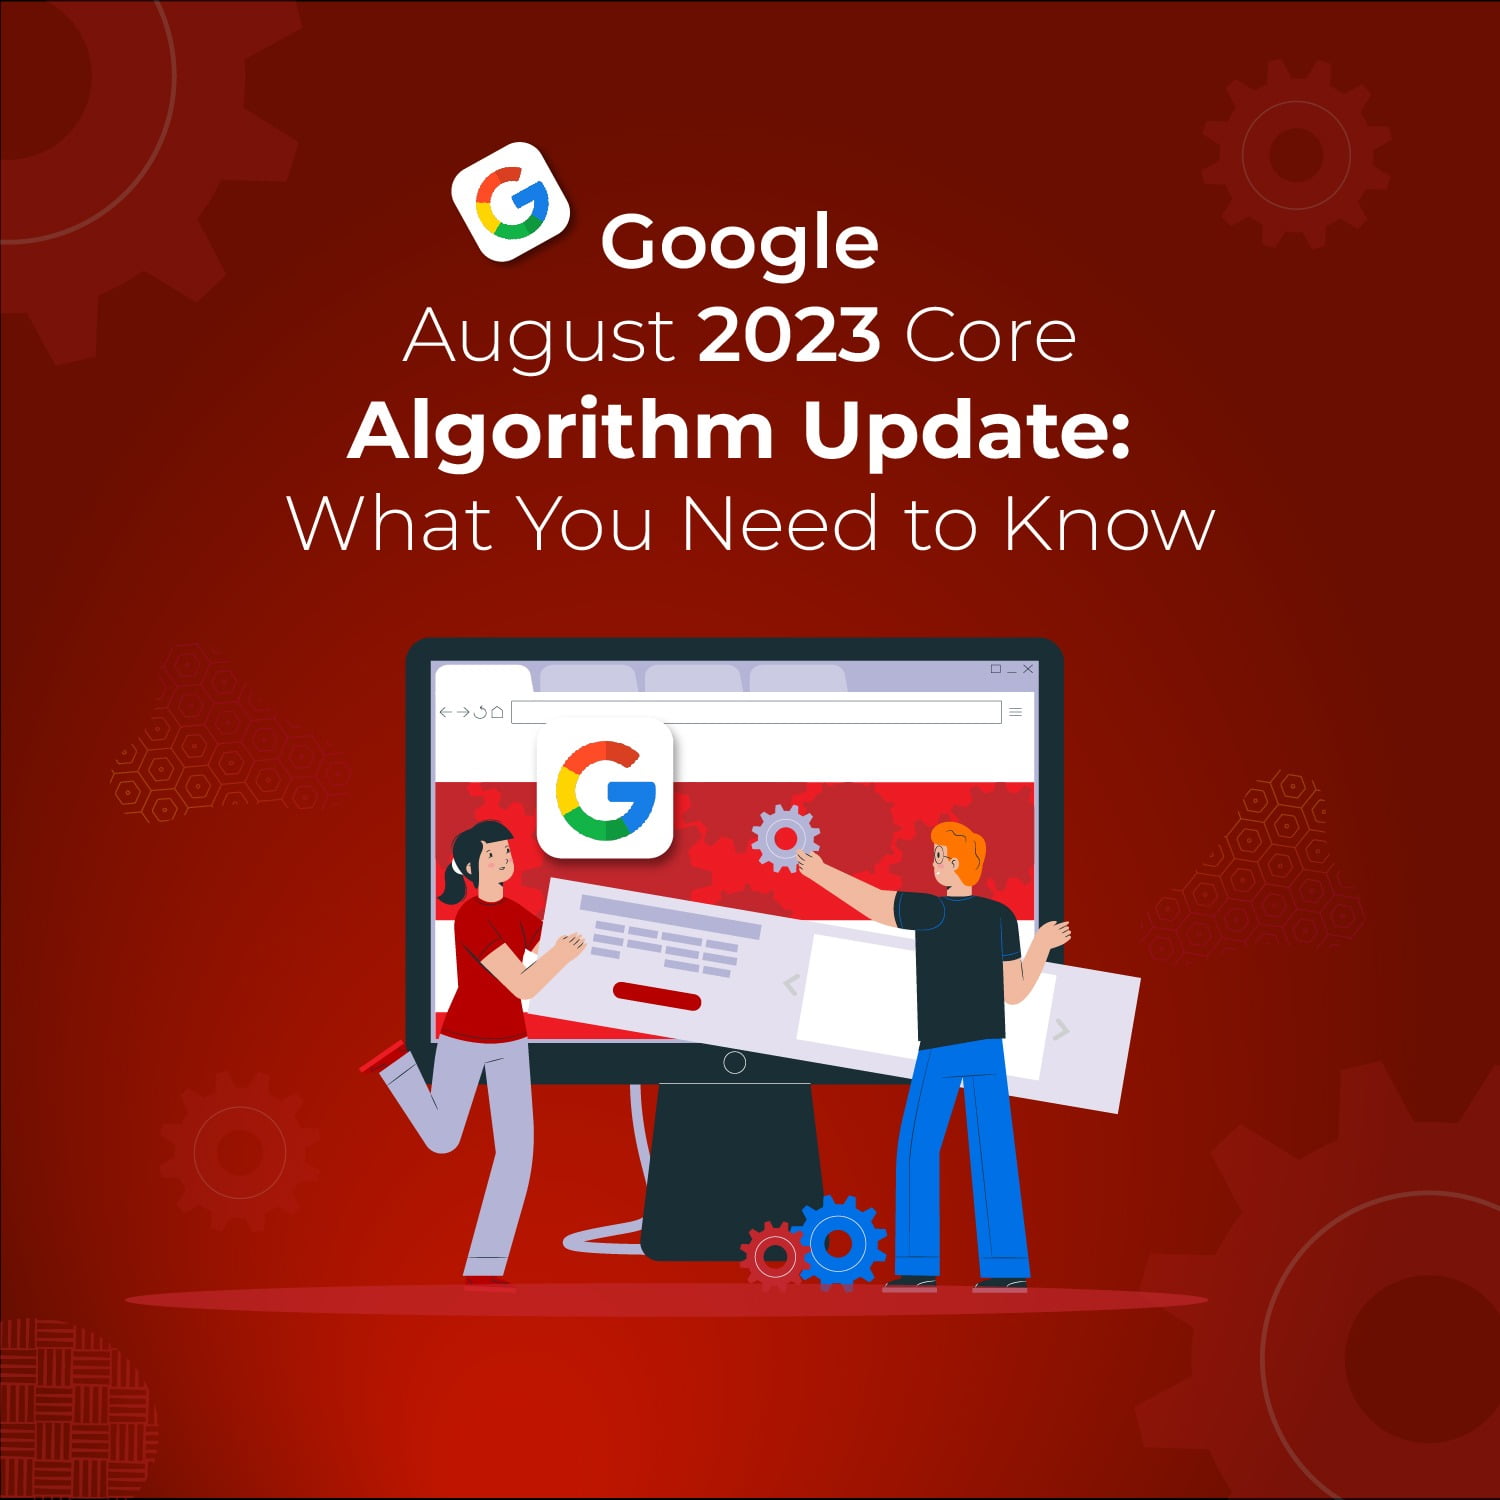 Google August 2023 Core Algorithm Update: What You Need to Know